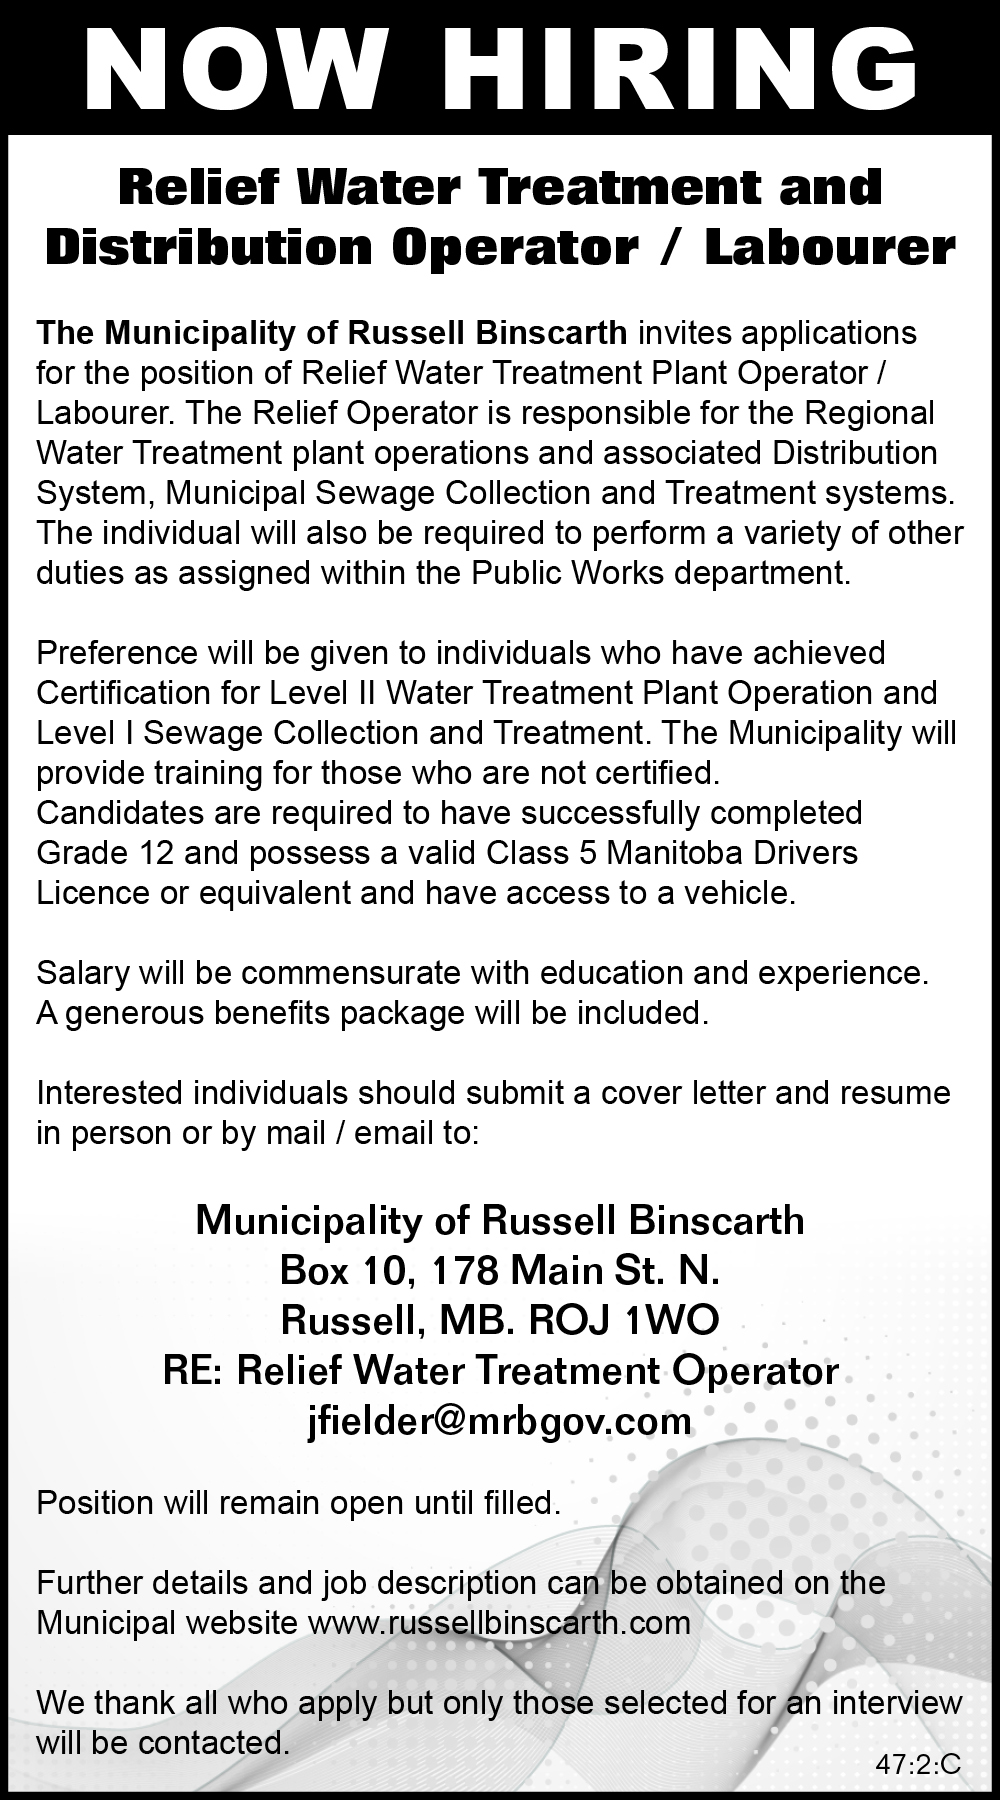 RM of Russell Binscarth - Relief Water Treatment and Distribution Operator / Labourer 